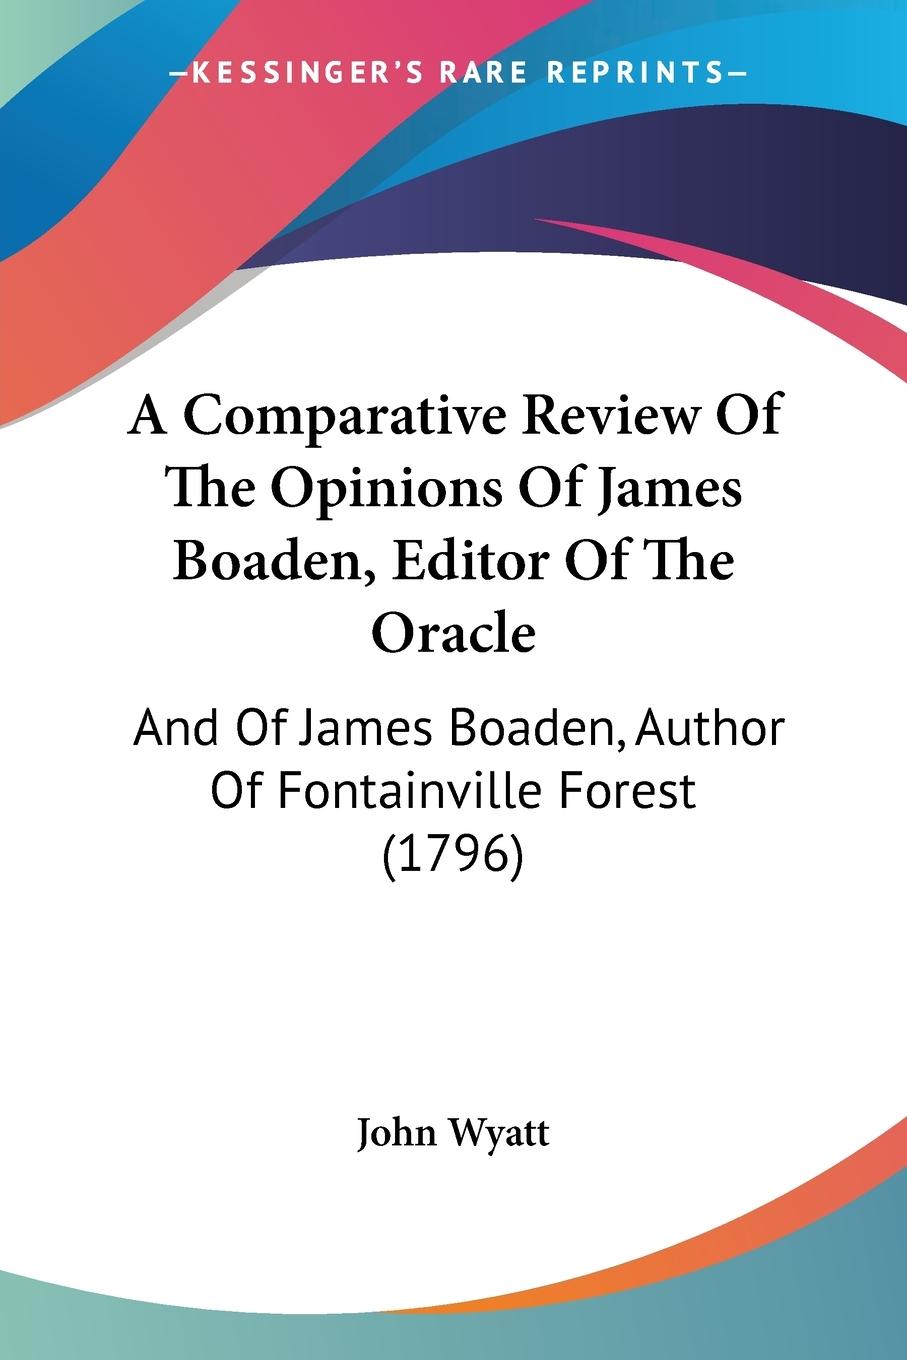 A Comparative Review Of The Opinions Of James Boaden, Editor Of The Oracle - John Wyatt